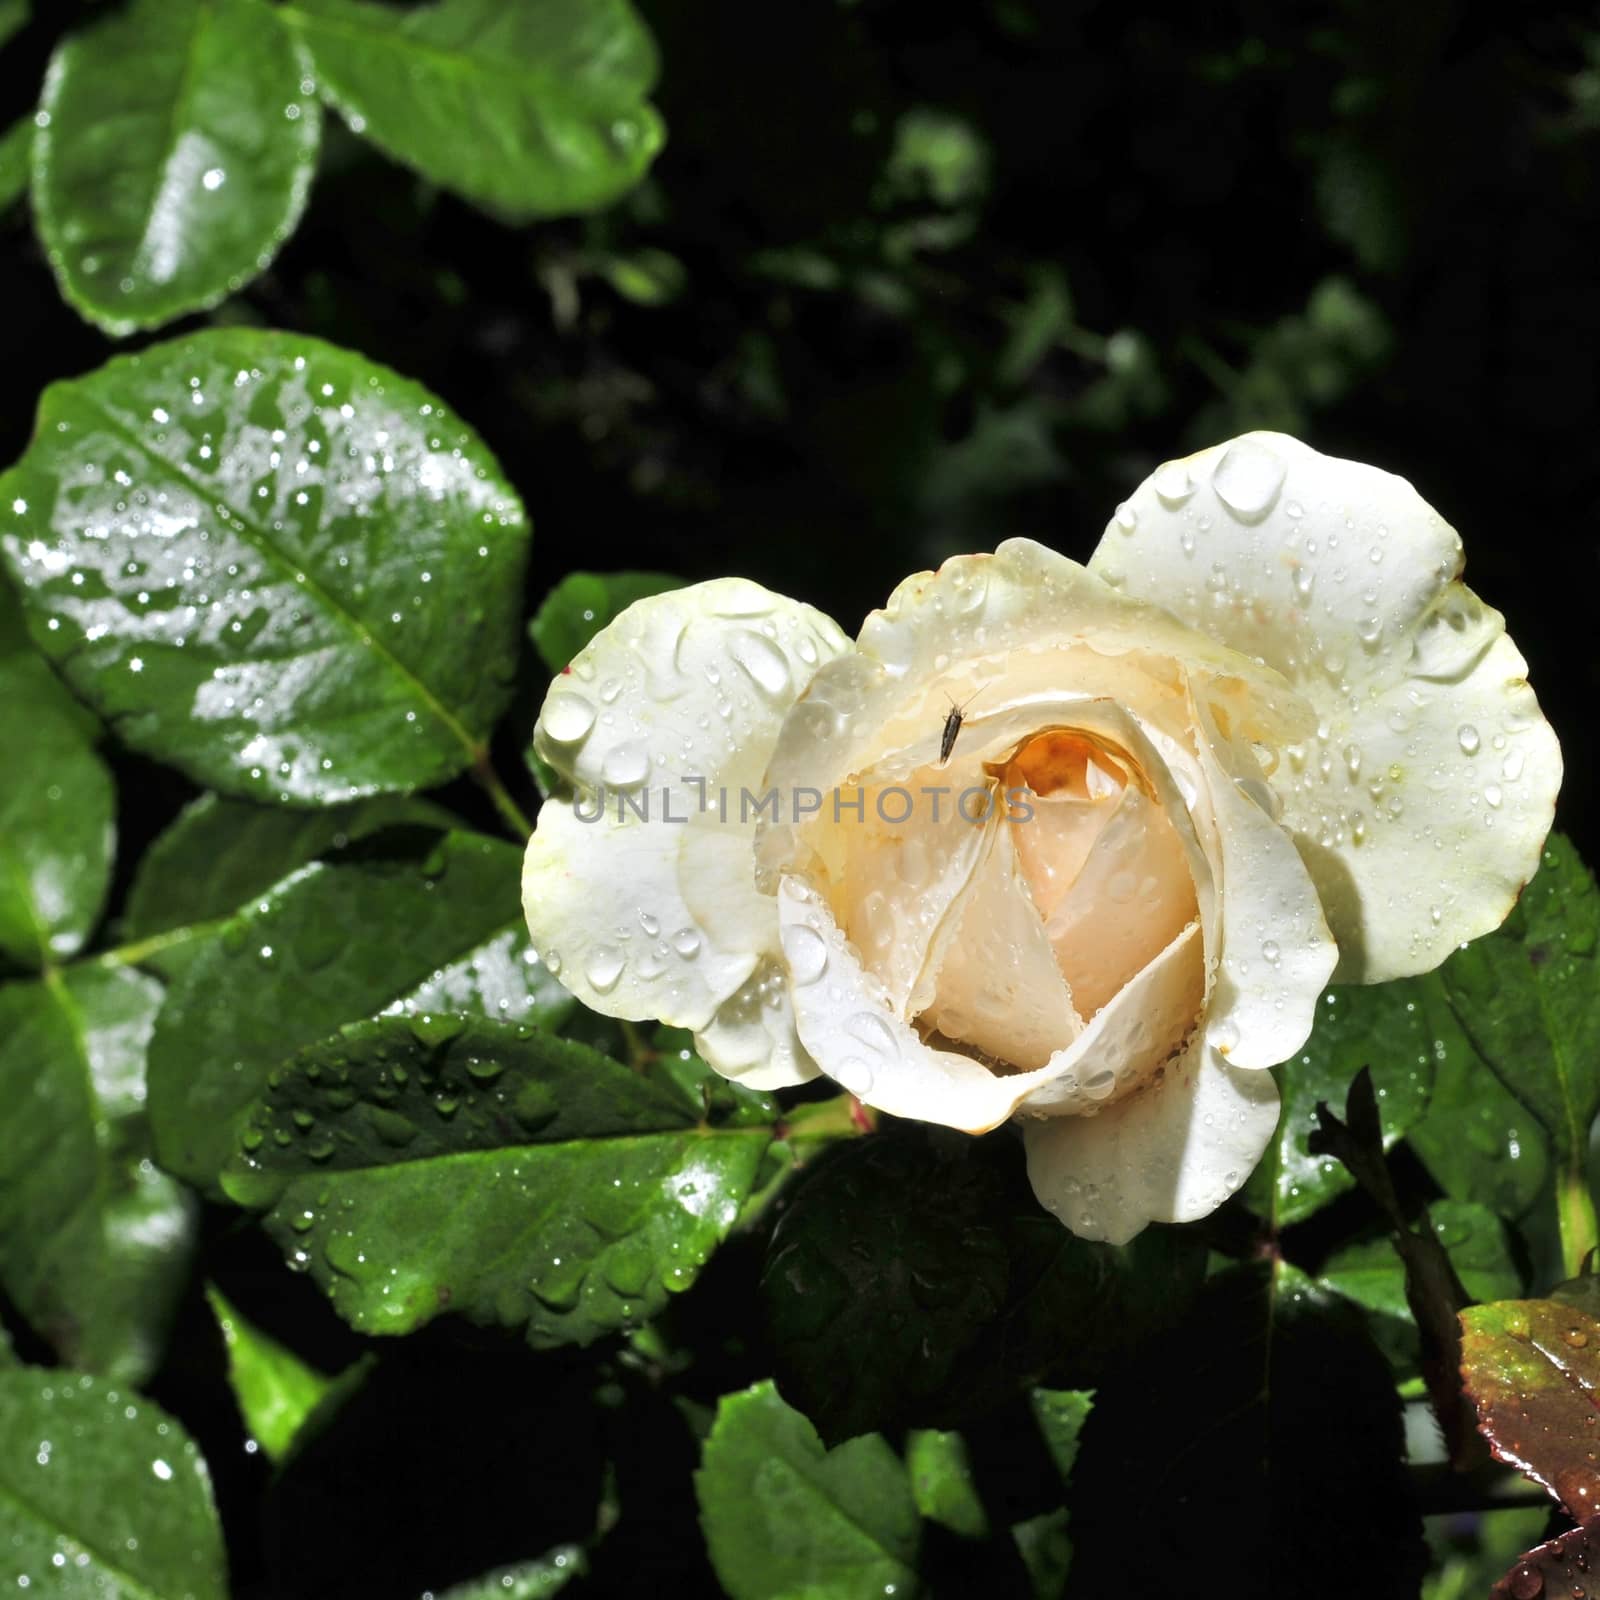 Flowering rose with raindrops in the garden on a sunny day